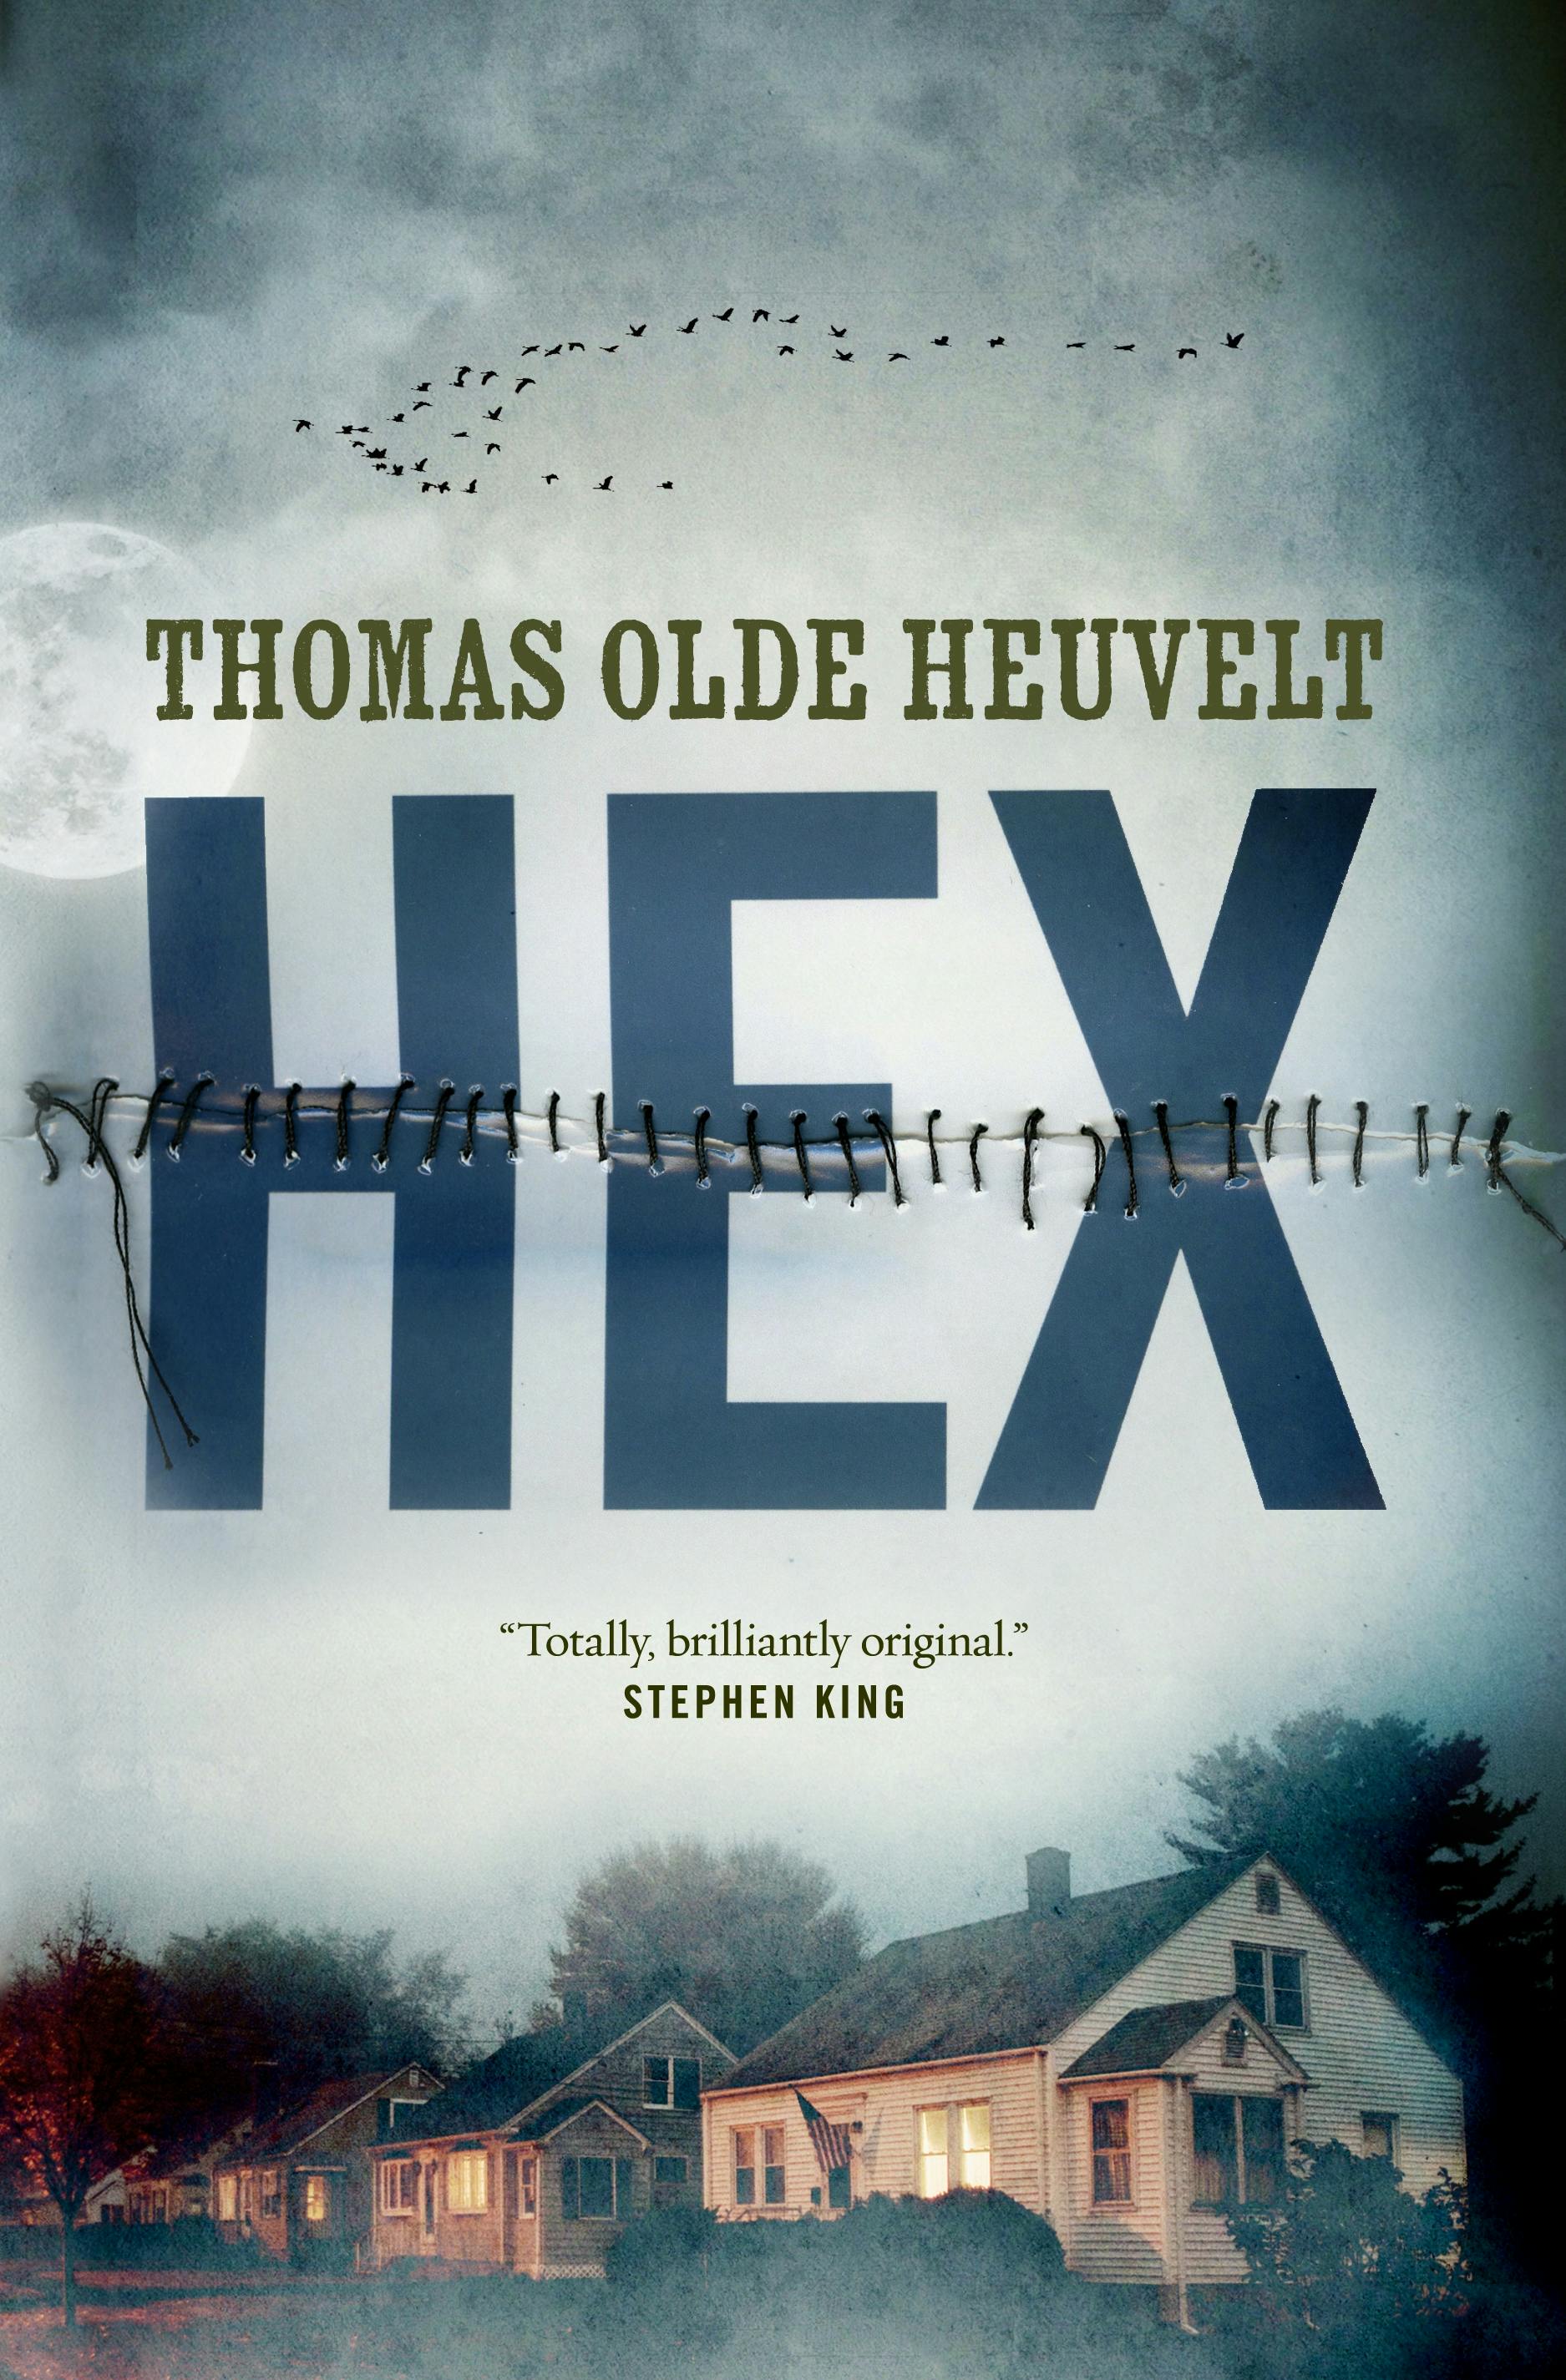 Cover for the book titled as: HEX